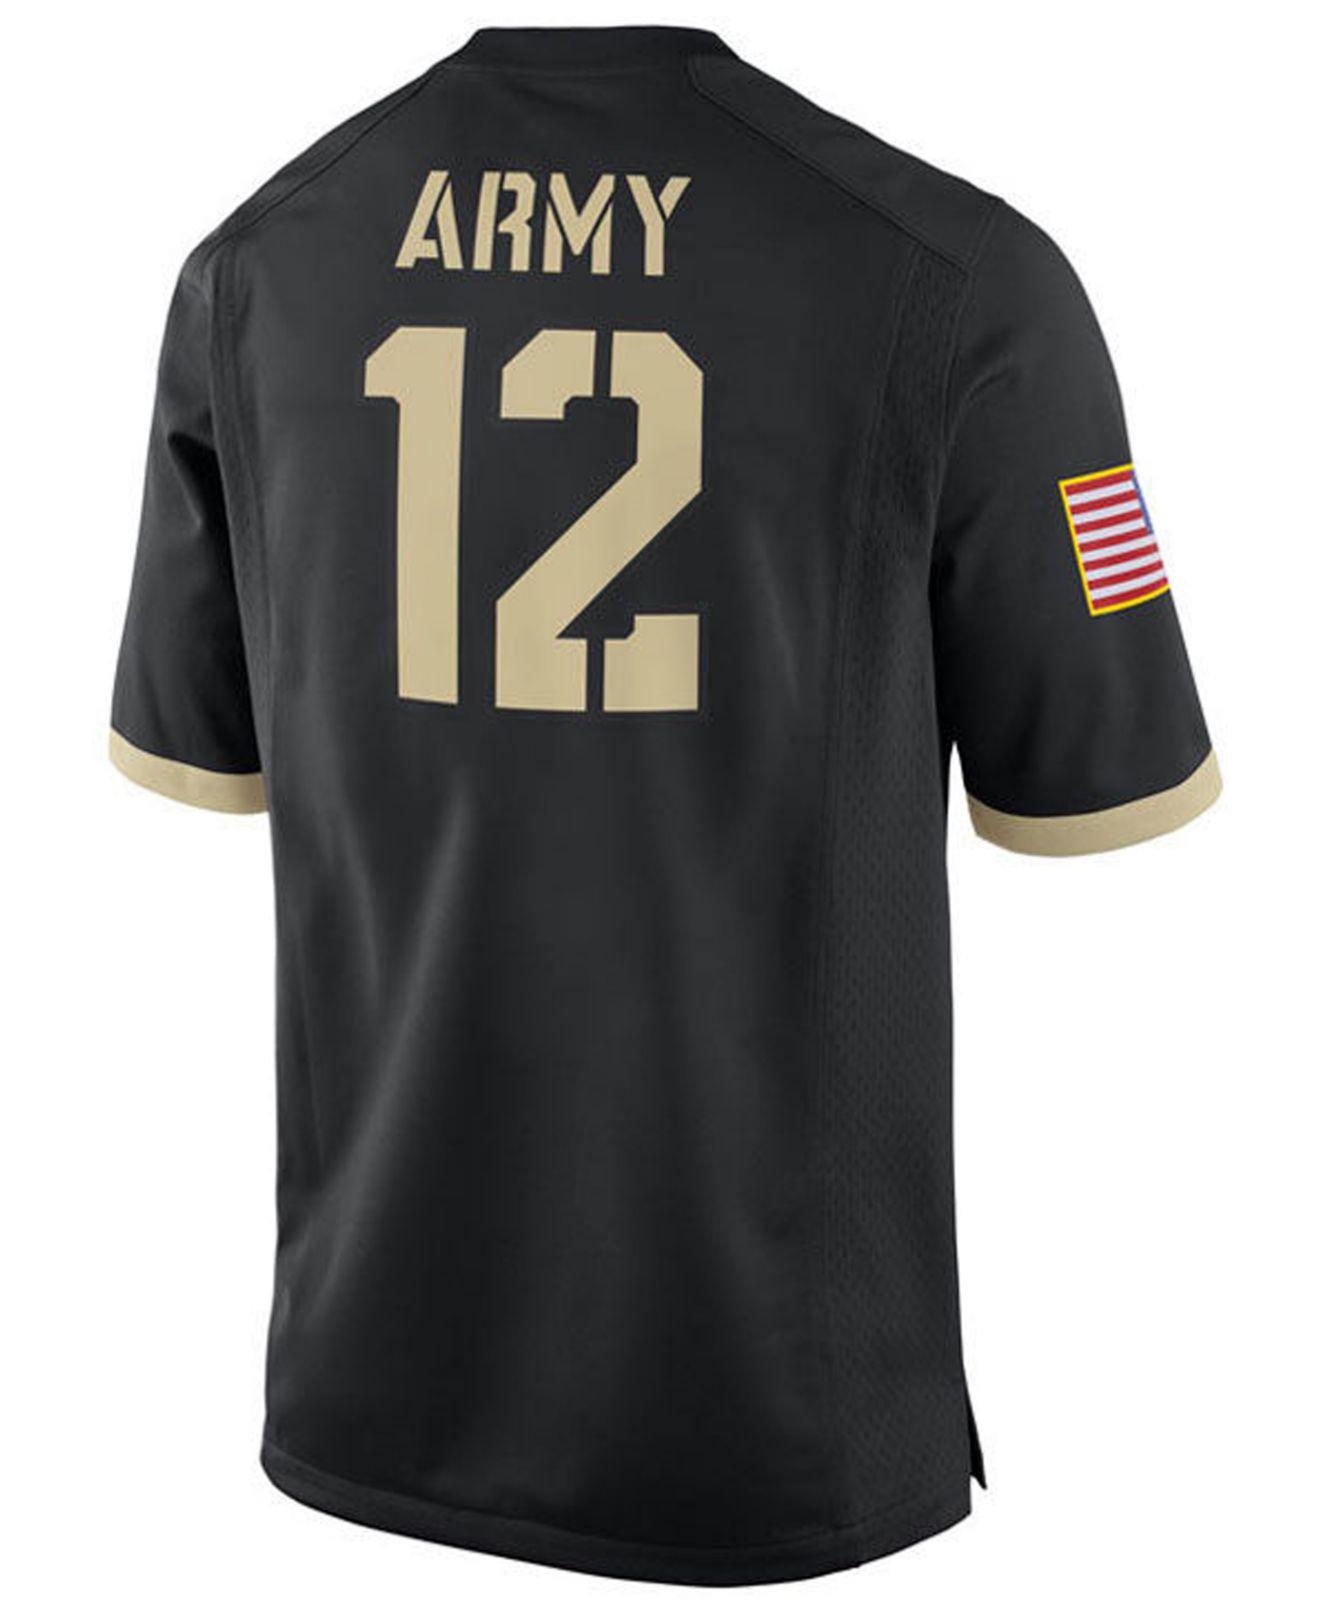 Nike Synthetic Army Black Knights Football Replica Game Jersey for Men